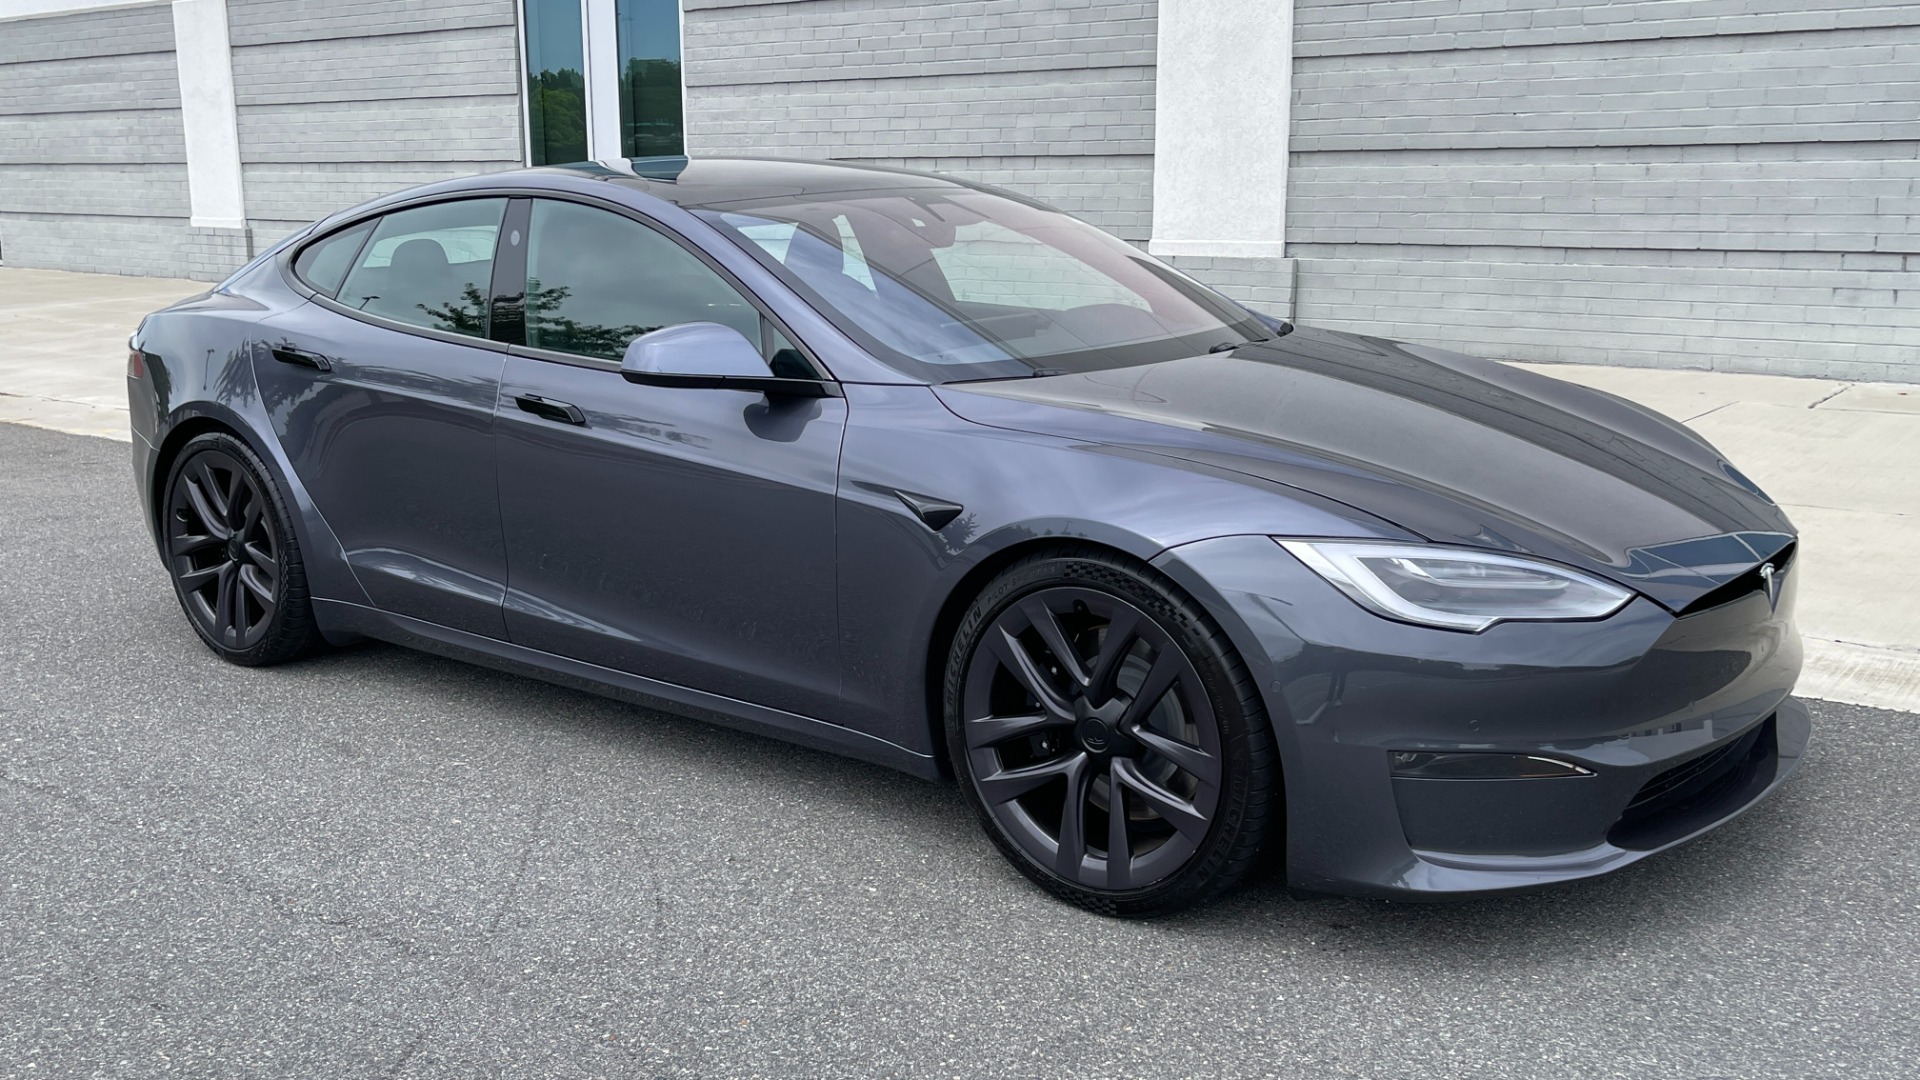 Used 2021 Tesla Model S Plaid / FULL SELF DRIVING / 21IN WHEELS / CARBON FIBER TRIM / PREMIUM CONNE for sale $134,000 at Formula Imports in Charlotte NC 28227 7